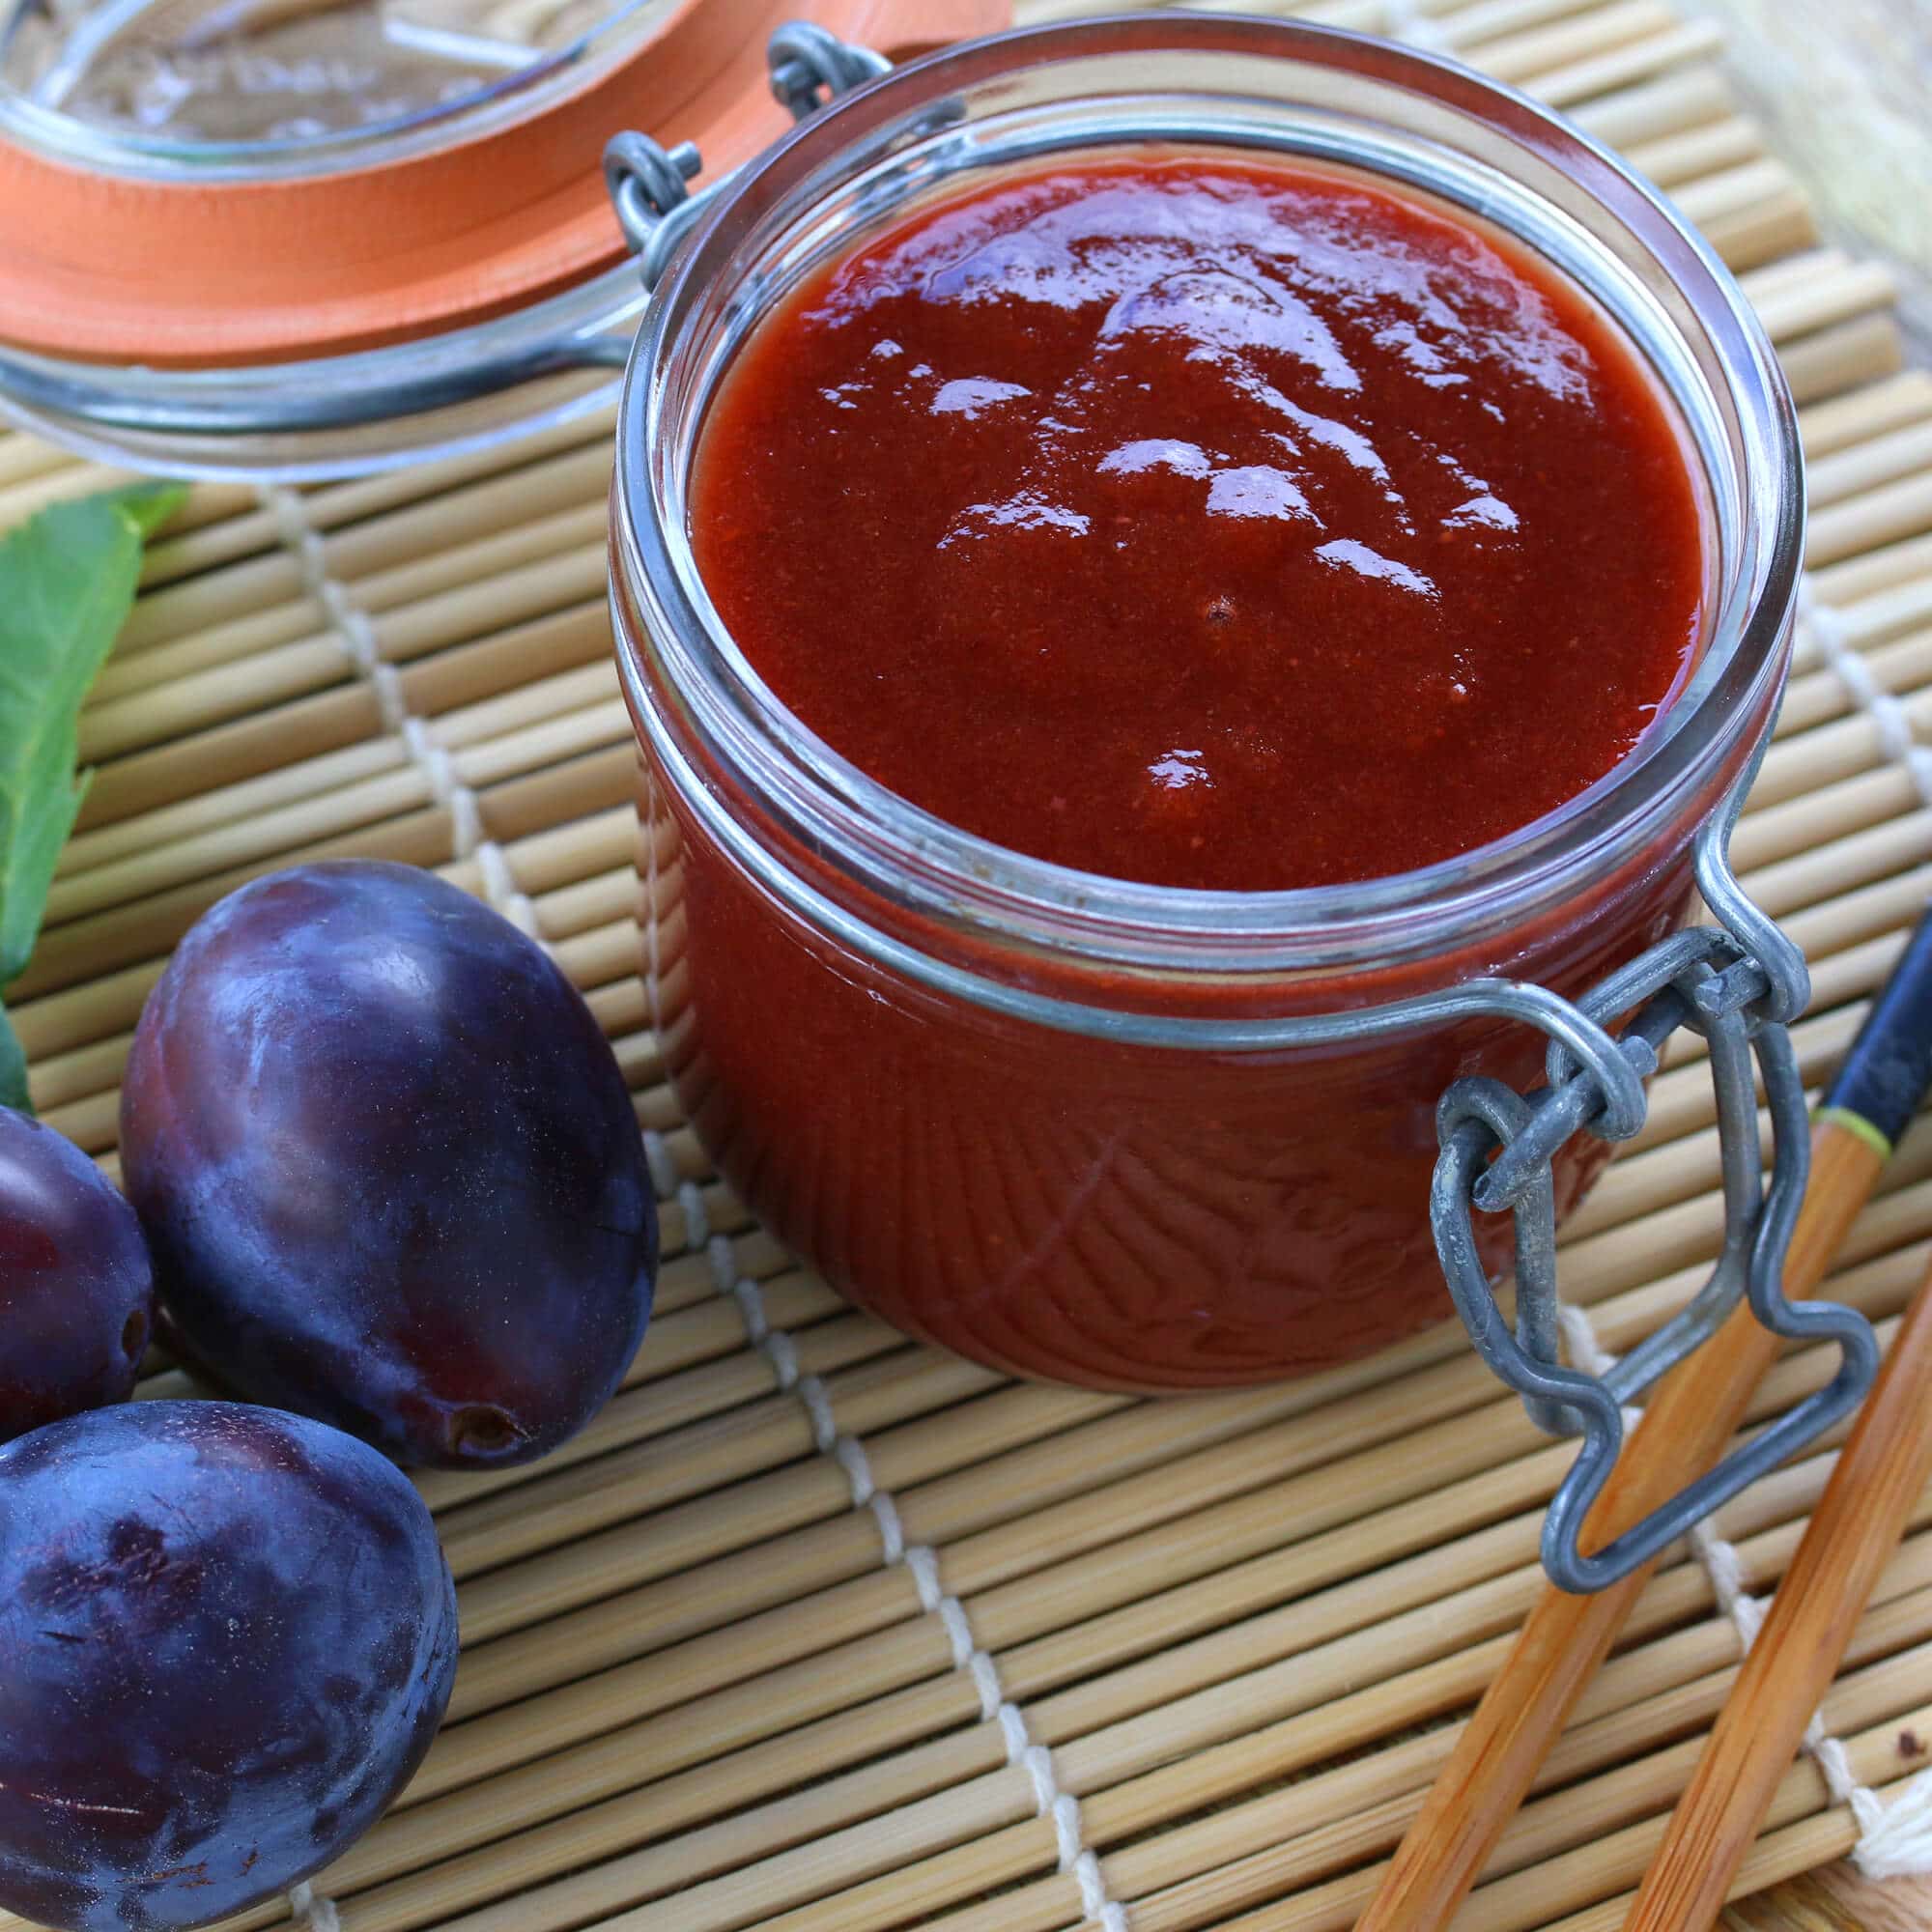 plum sauce recipe homemade duck sauce Chinese asian condiment traditional authentic